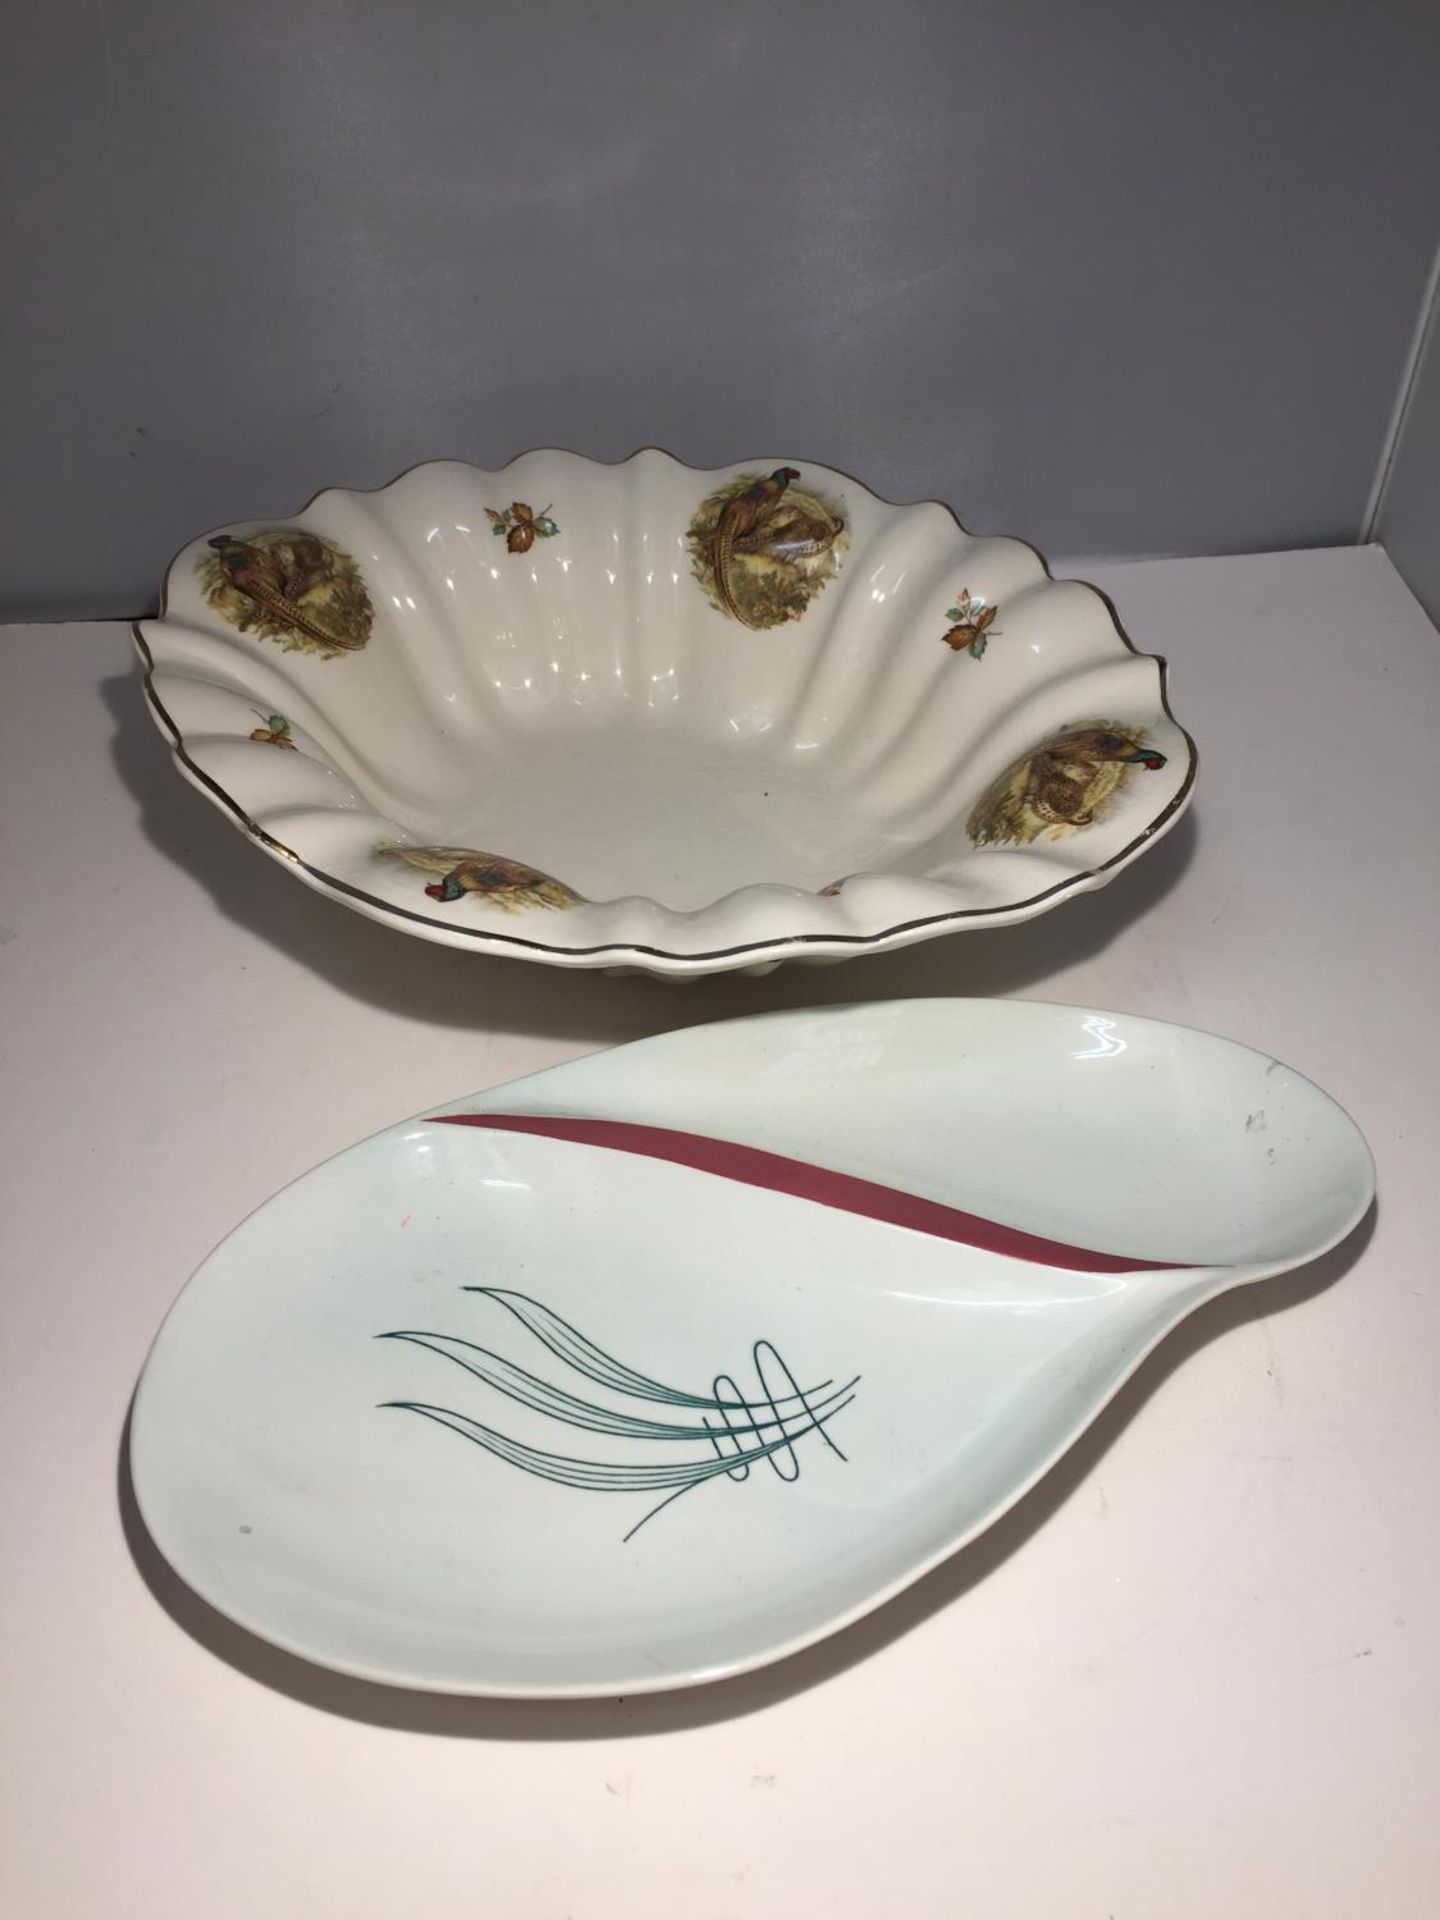 A STAFFORDSHIRE IRONSTONE DISH IN A PHEASANT DESIGN AND A CARLTONWARE SERVING DISH